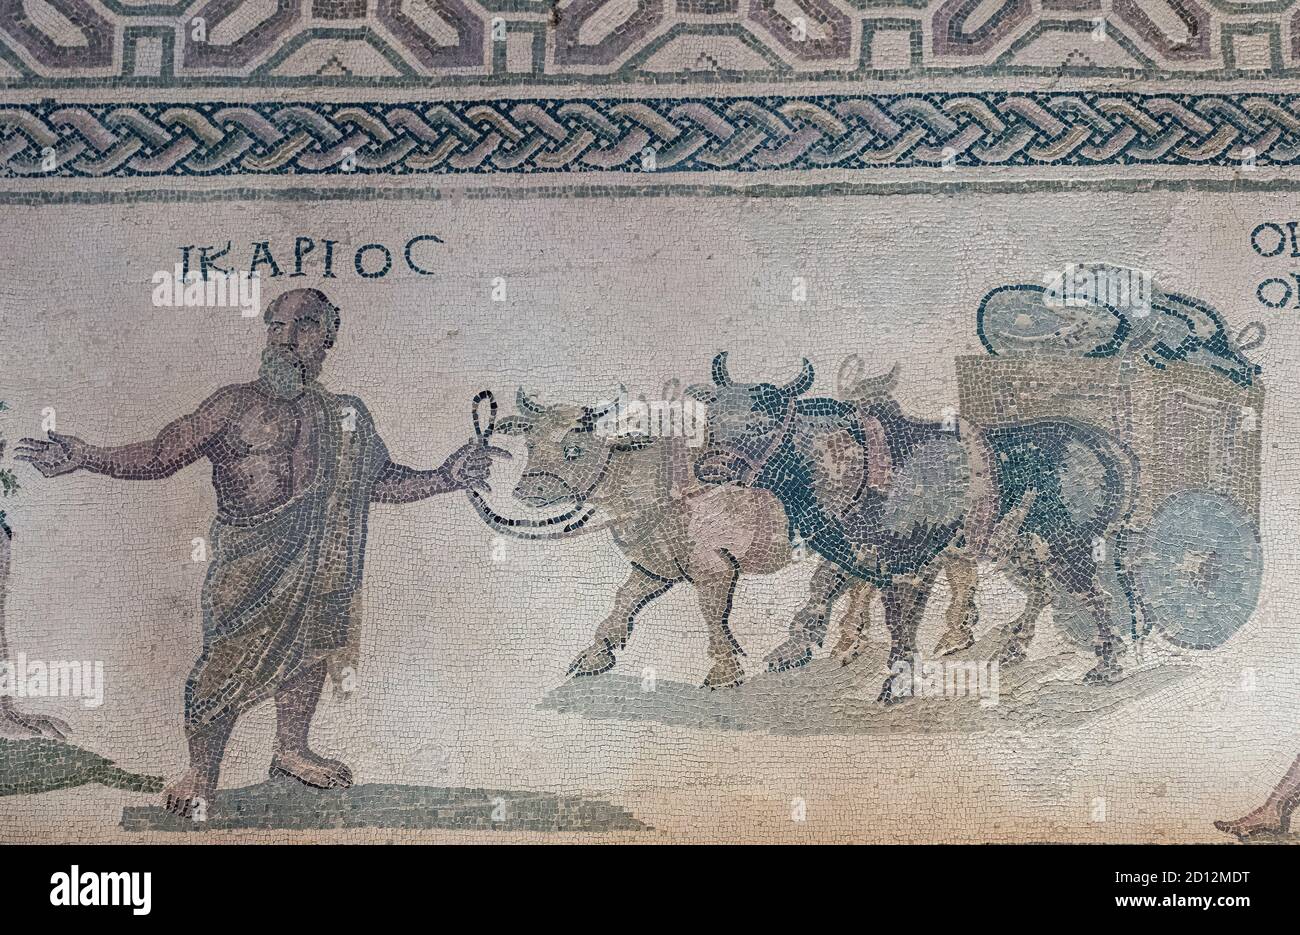 House of Dionysos: Icarios depicted holding the reins of an ox-driven double wheeled cart, filled with sacks of wine. Stock Photo